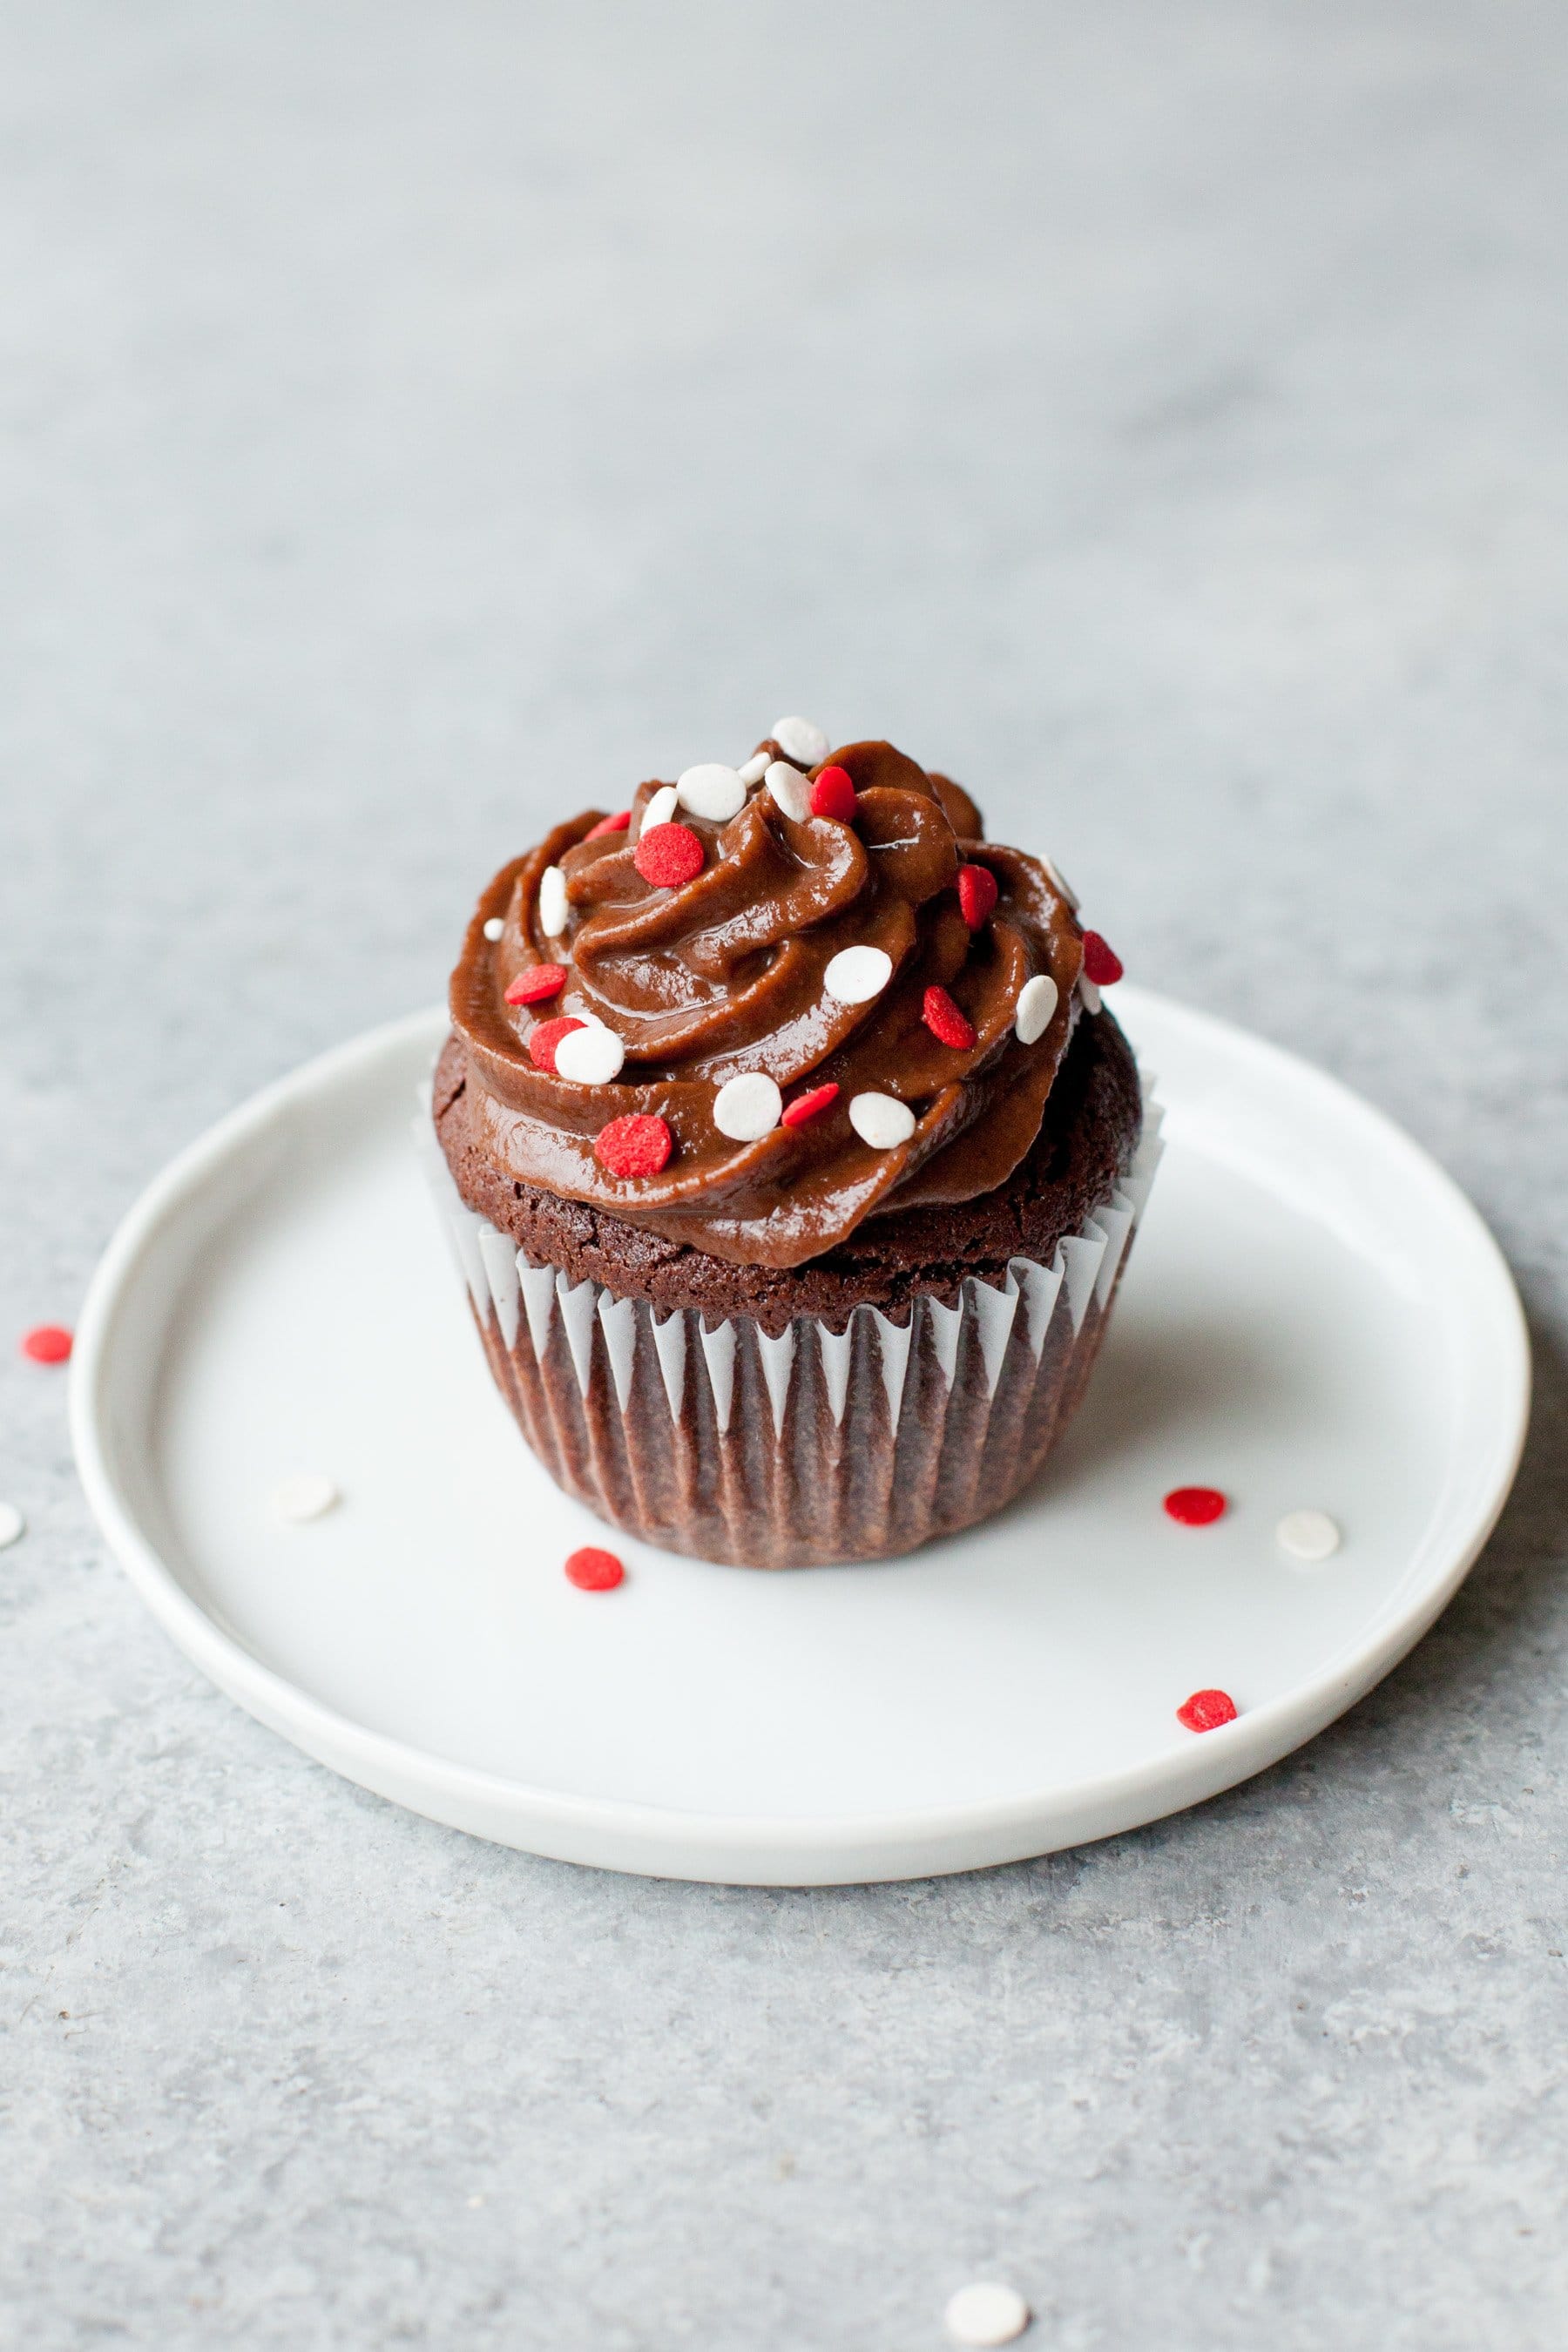 A healthier chocolate cupcake sits on a white plate.